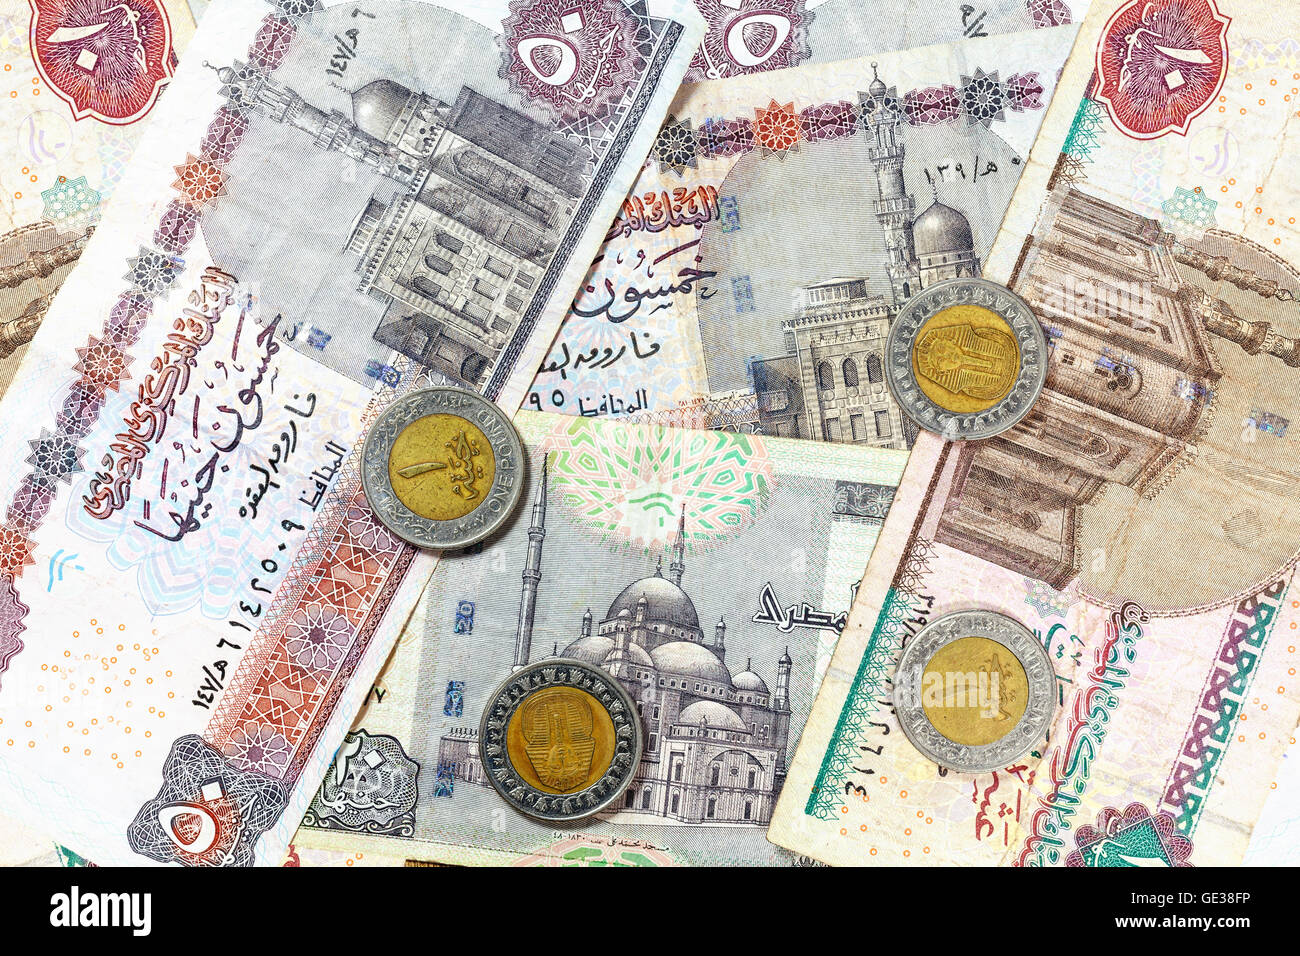 Money from Egypt, pound banknotes and coins. Stock Photo